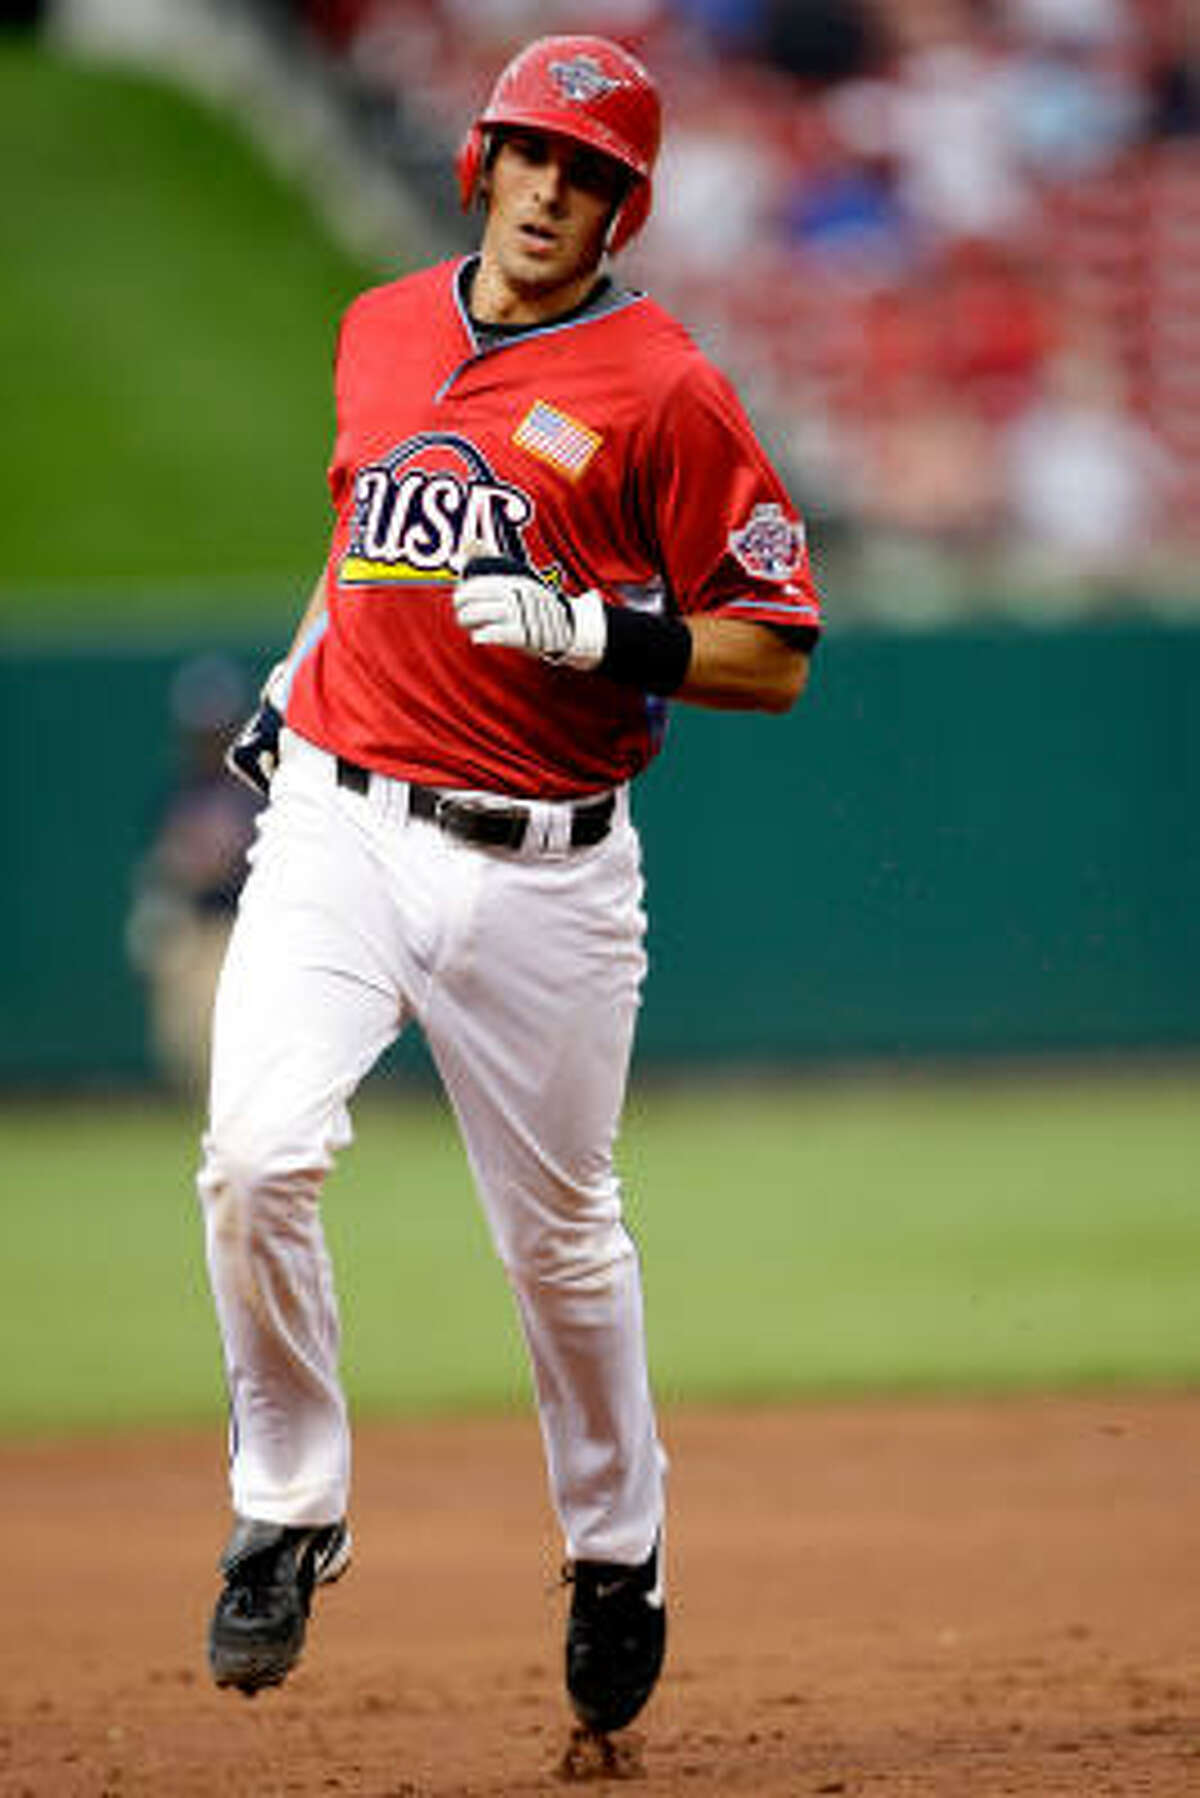 U.S. Futures All-Star Jason Castro of the Houston Astros rounds the bases after his home run.